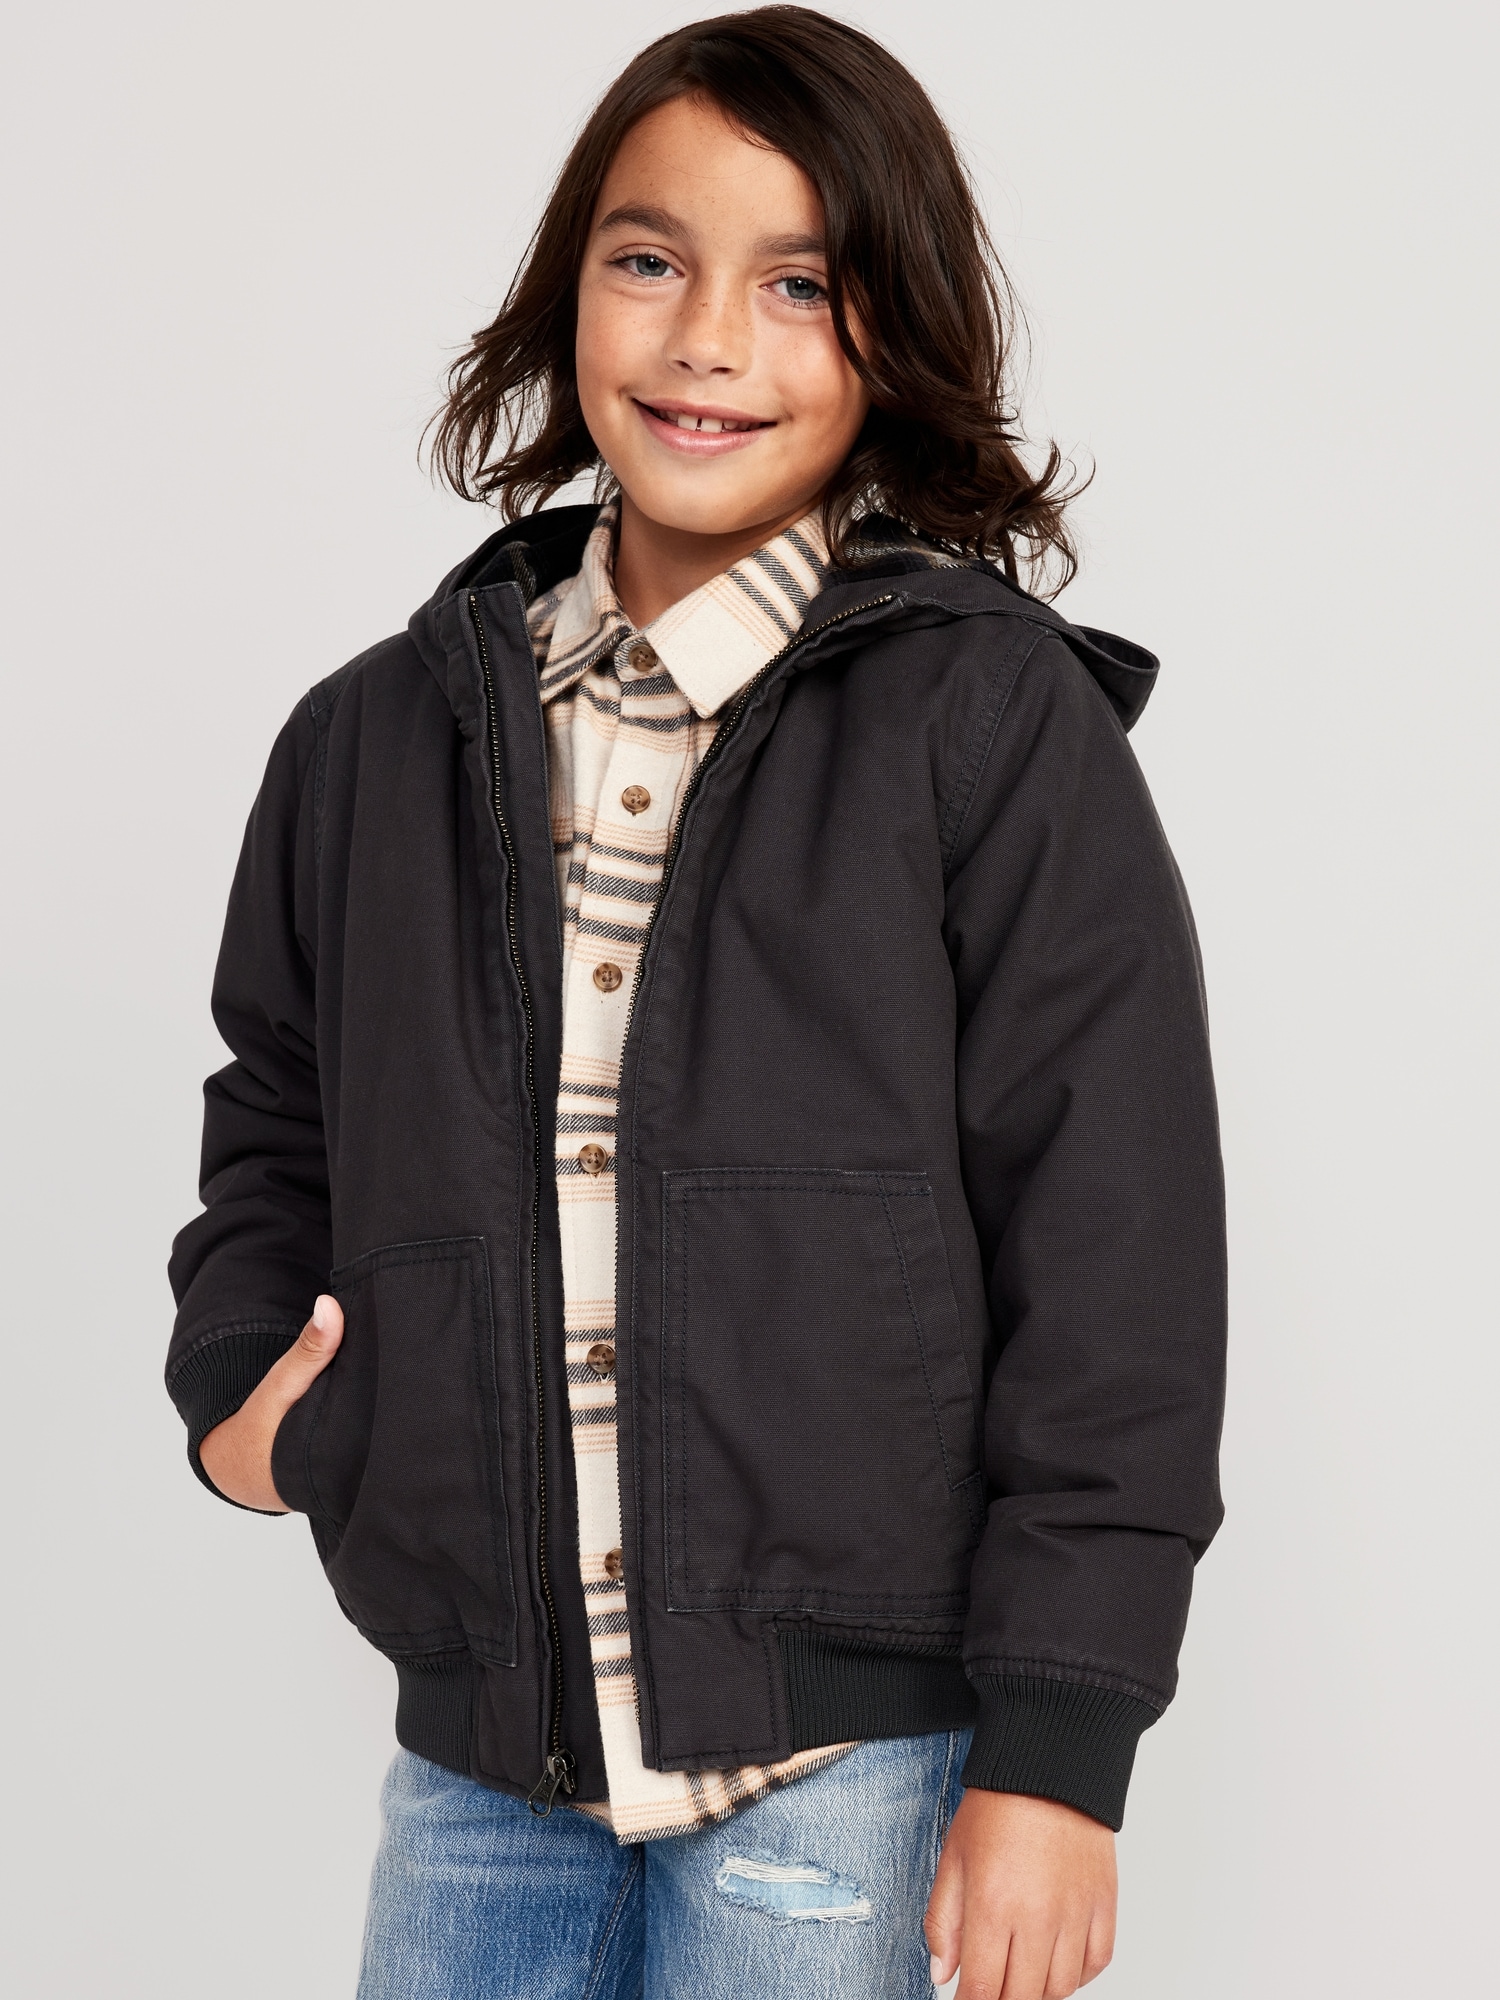 Flannel-Lined Hooded Zip Utility Jacket for Boys | Old Navy